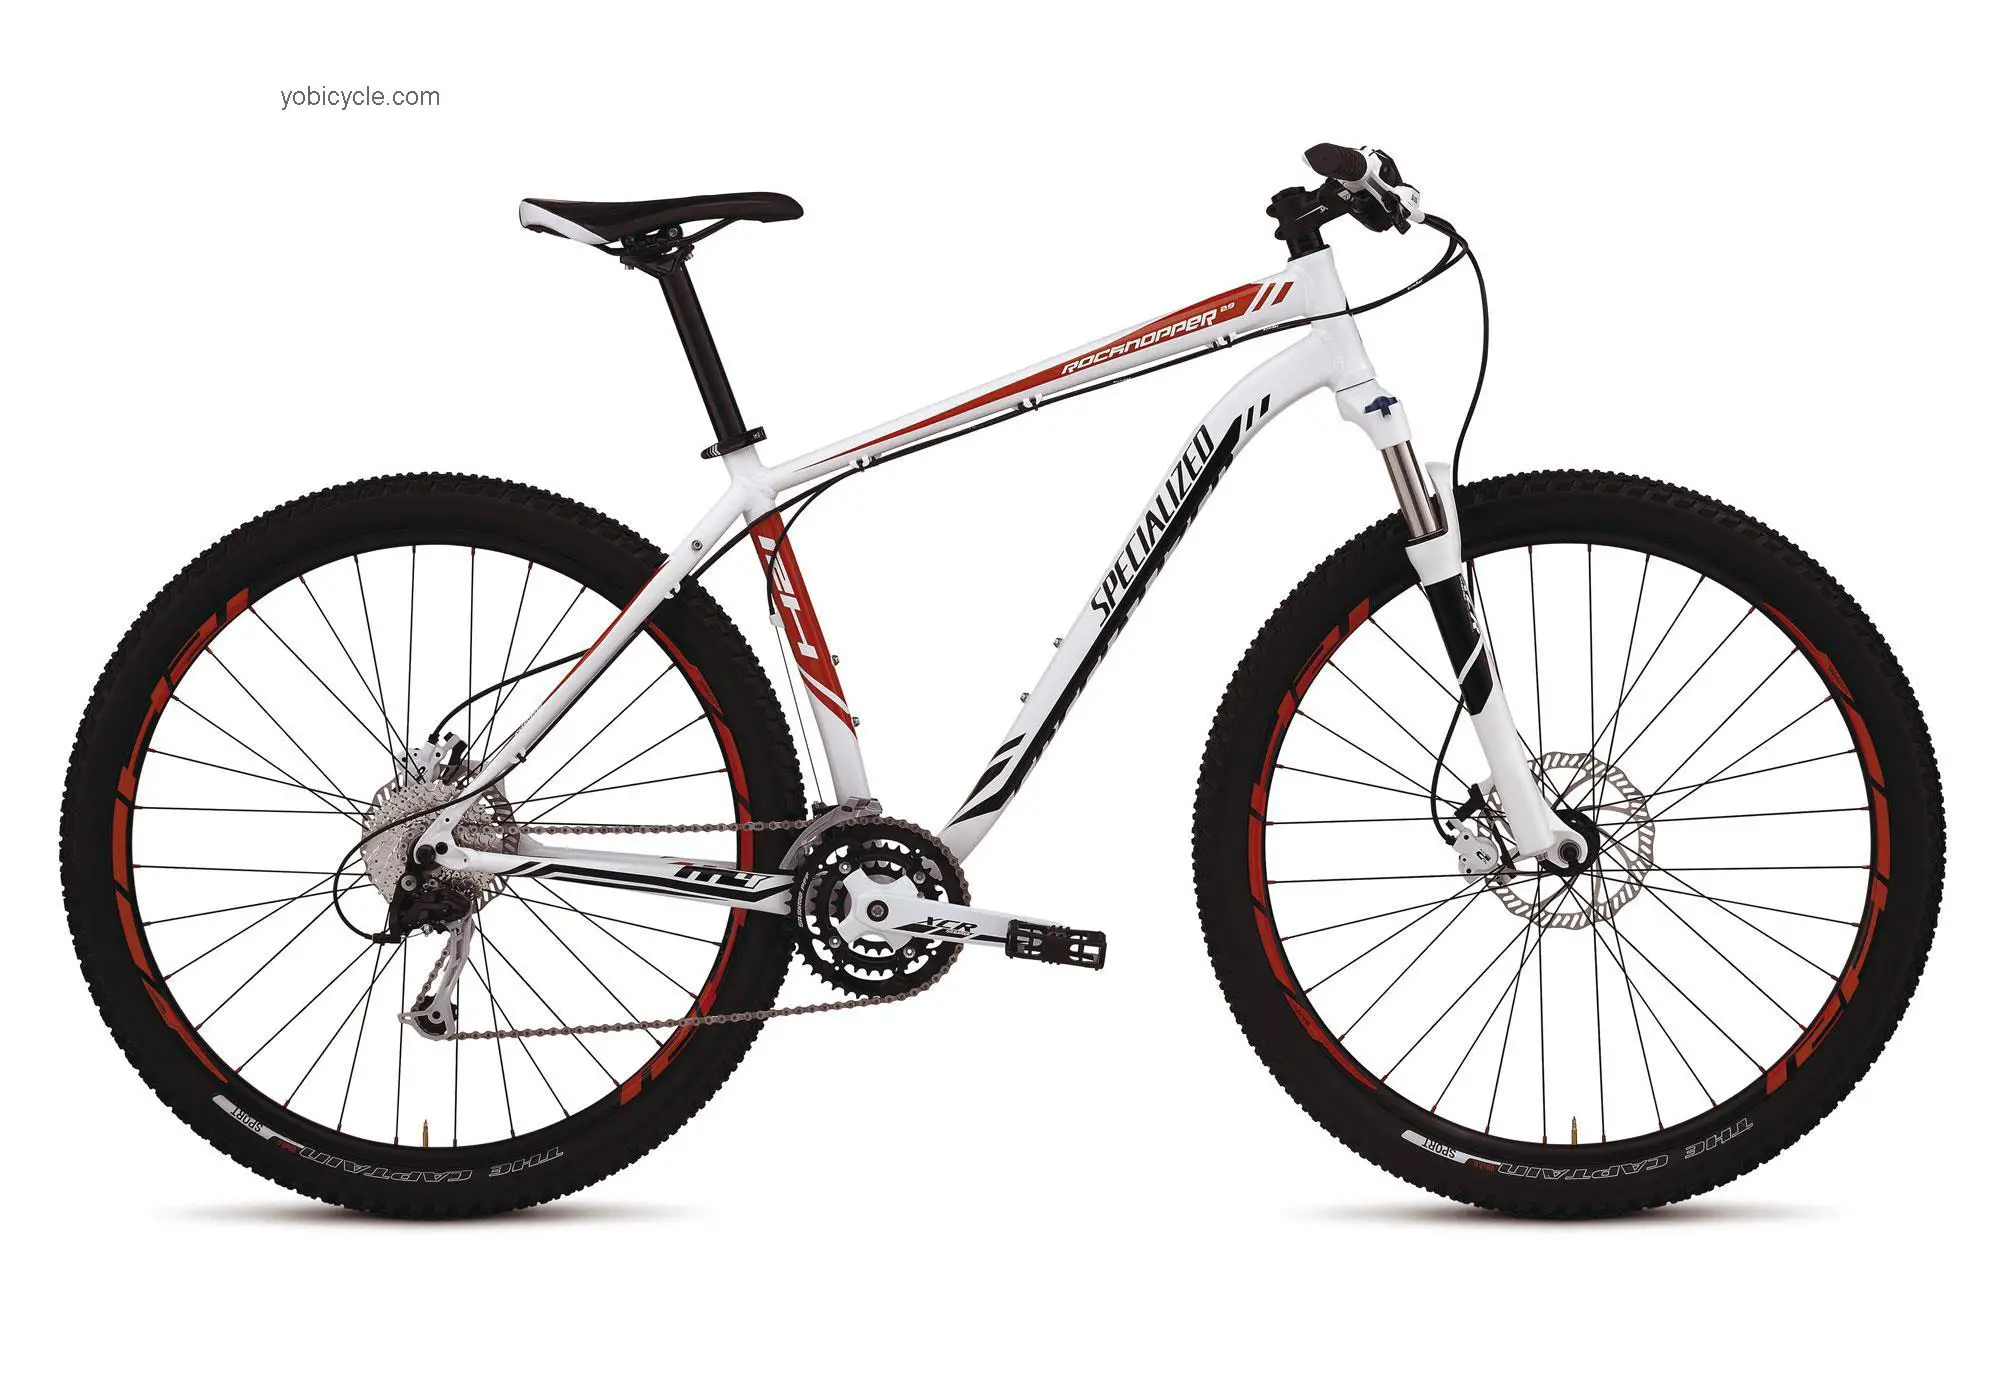 Specialized Rockhopper 29 competitors and comparison tool online specs and performance